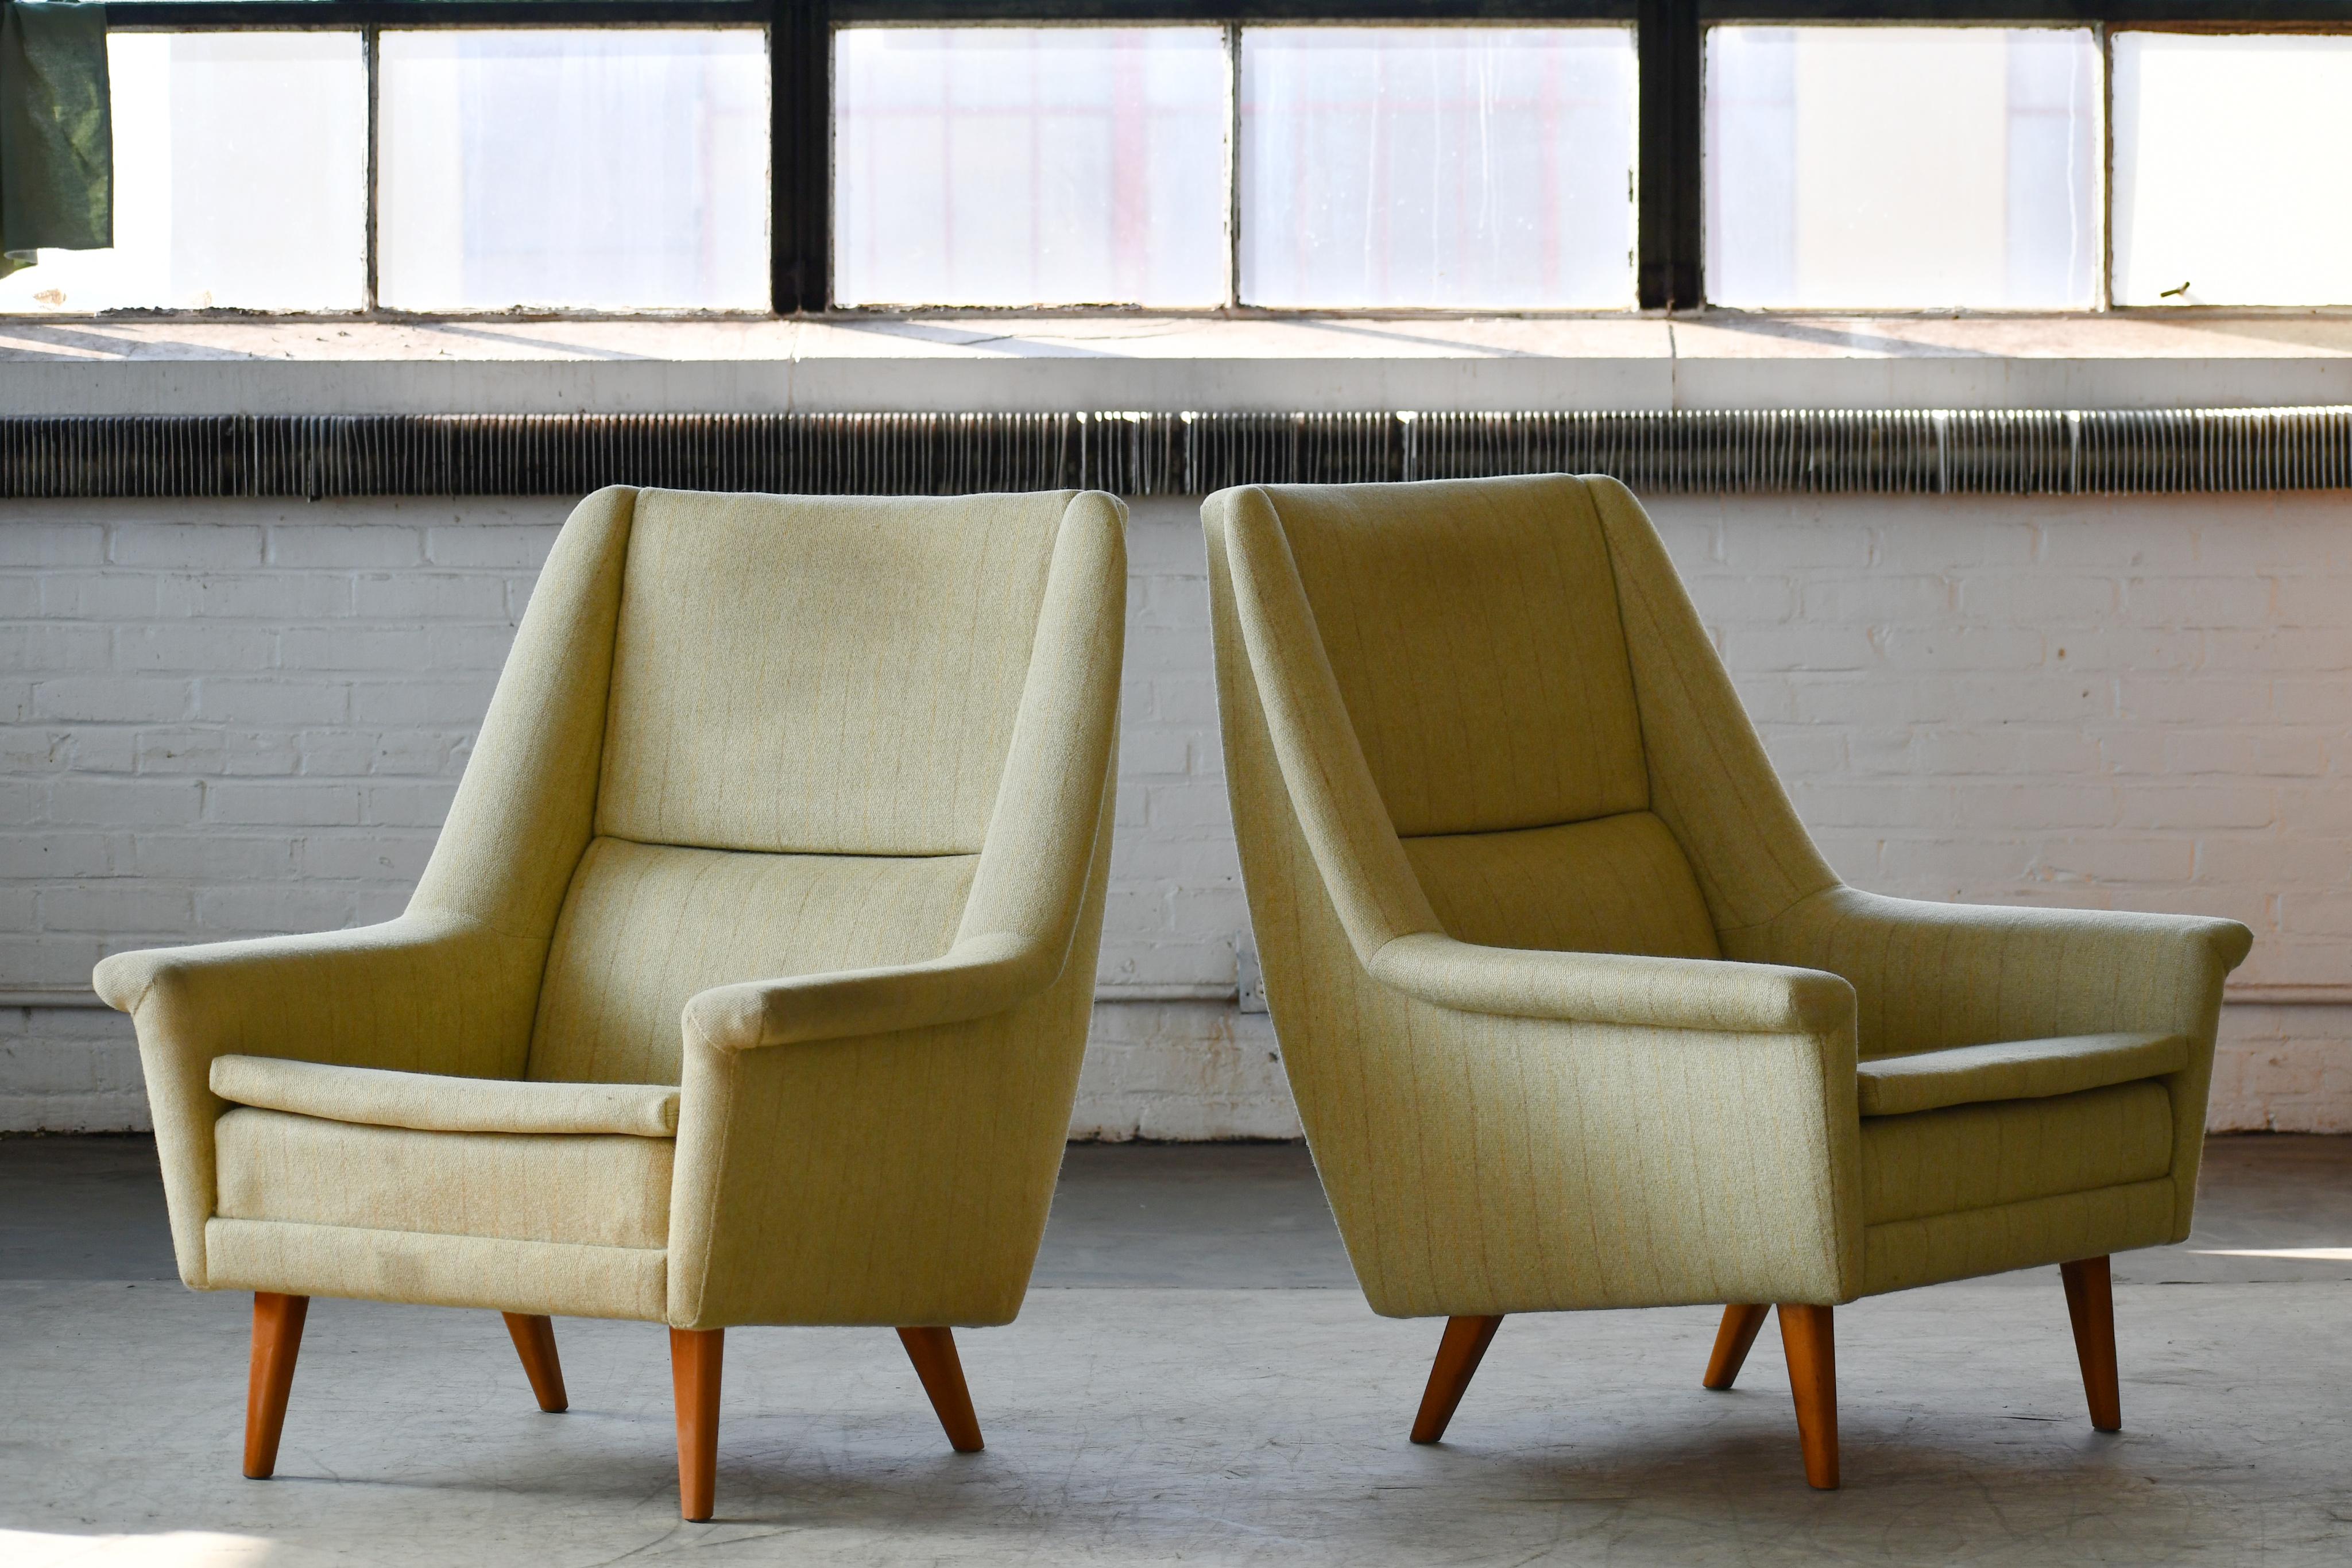 Classic and very elegant pair of lounge chairs designed by Folke Ohlsson circa 1955 for Fritz Hansen. We love the elegant angles of the chairs and the legs combined the slim cushions. Very cutting edge in their day and just very timeless modern